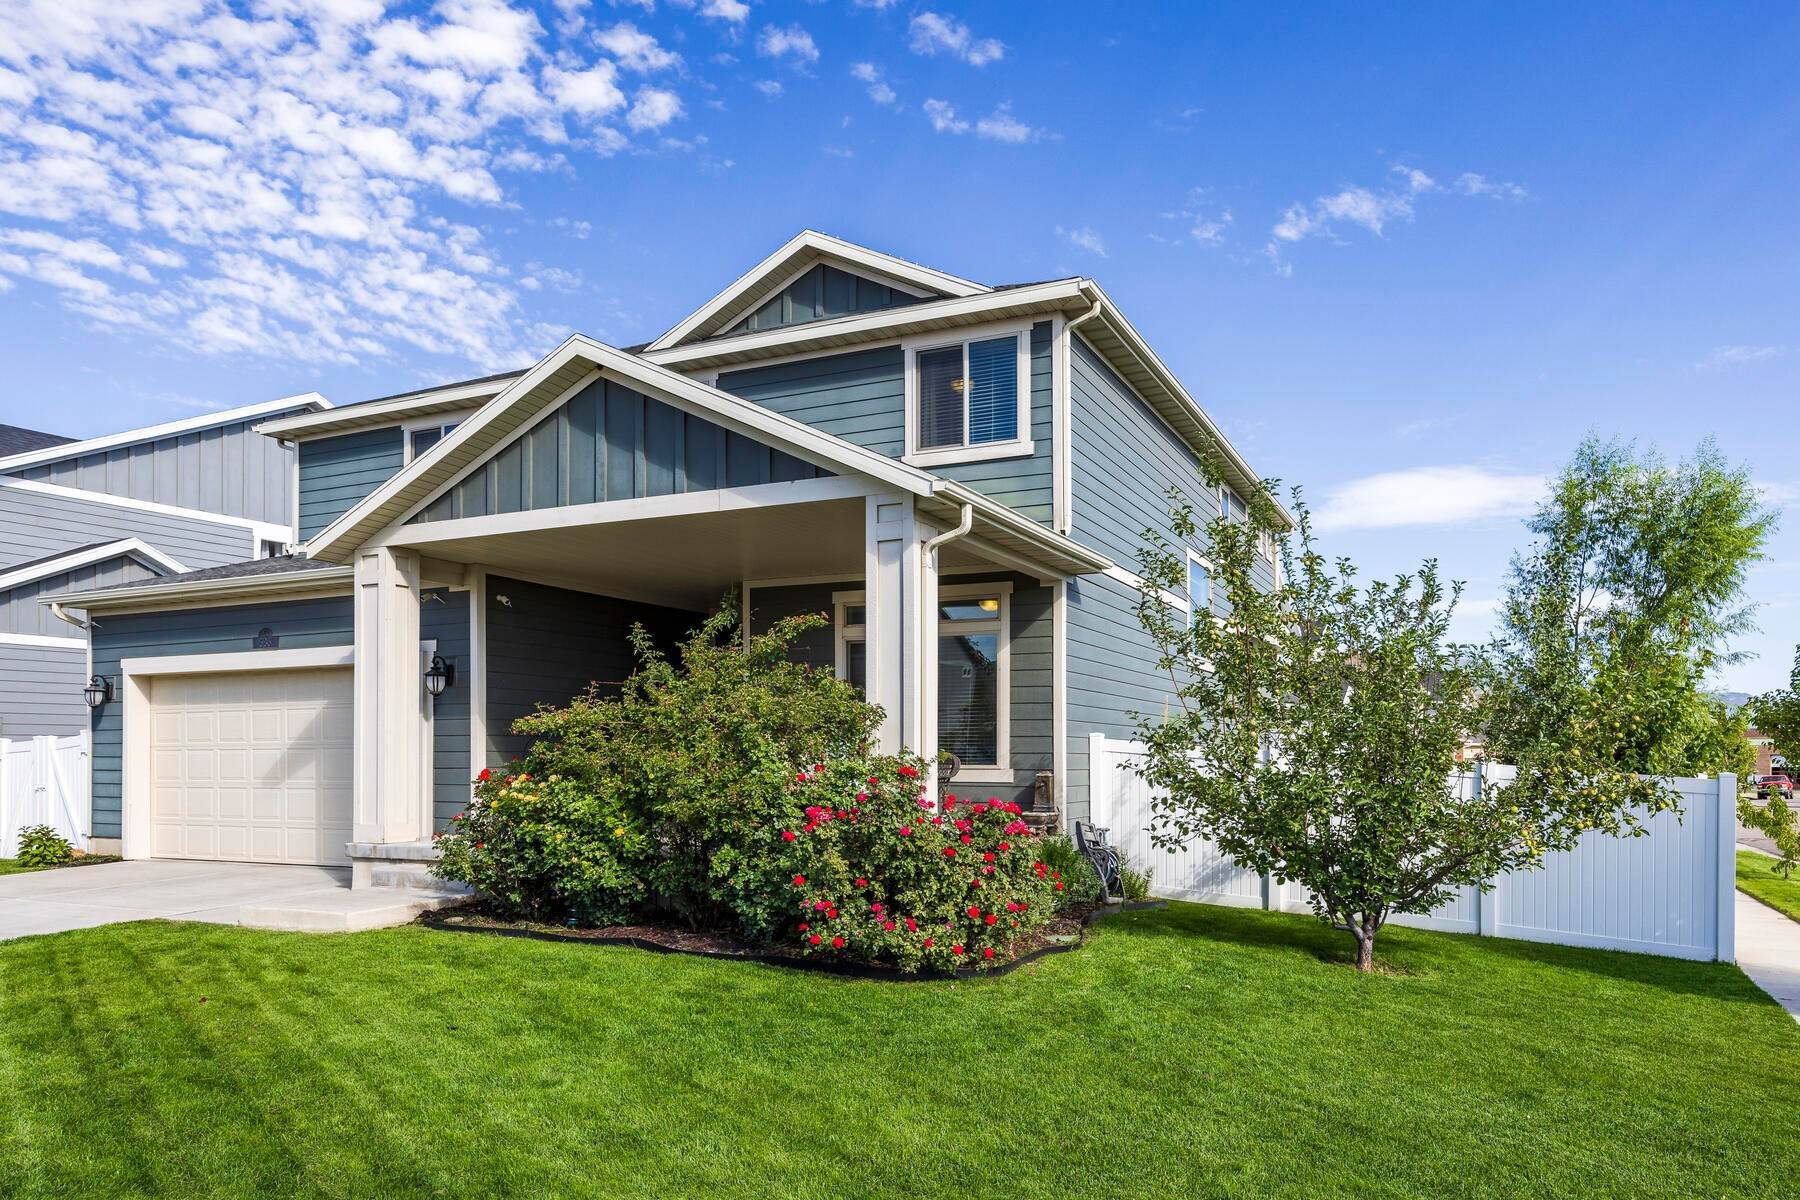 42. Single Family Homes for Sale at Immaculate Home, Beautiful Curb Appeal, and Basement Just Finished! 536 West 1200 South Heber City, Utah 84032 United States